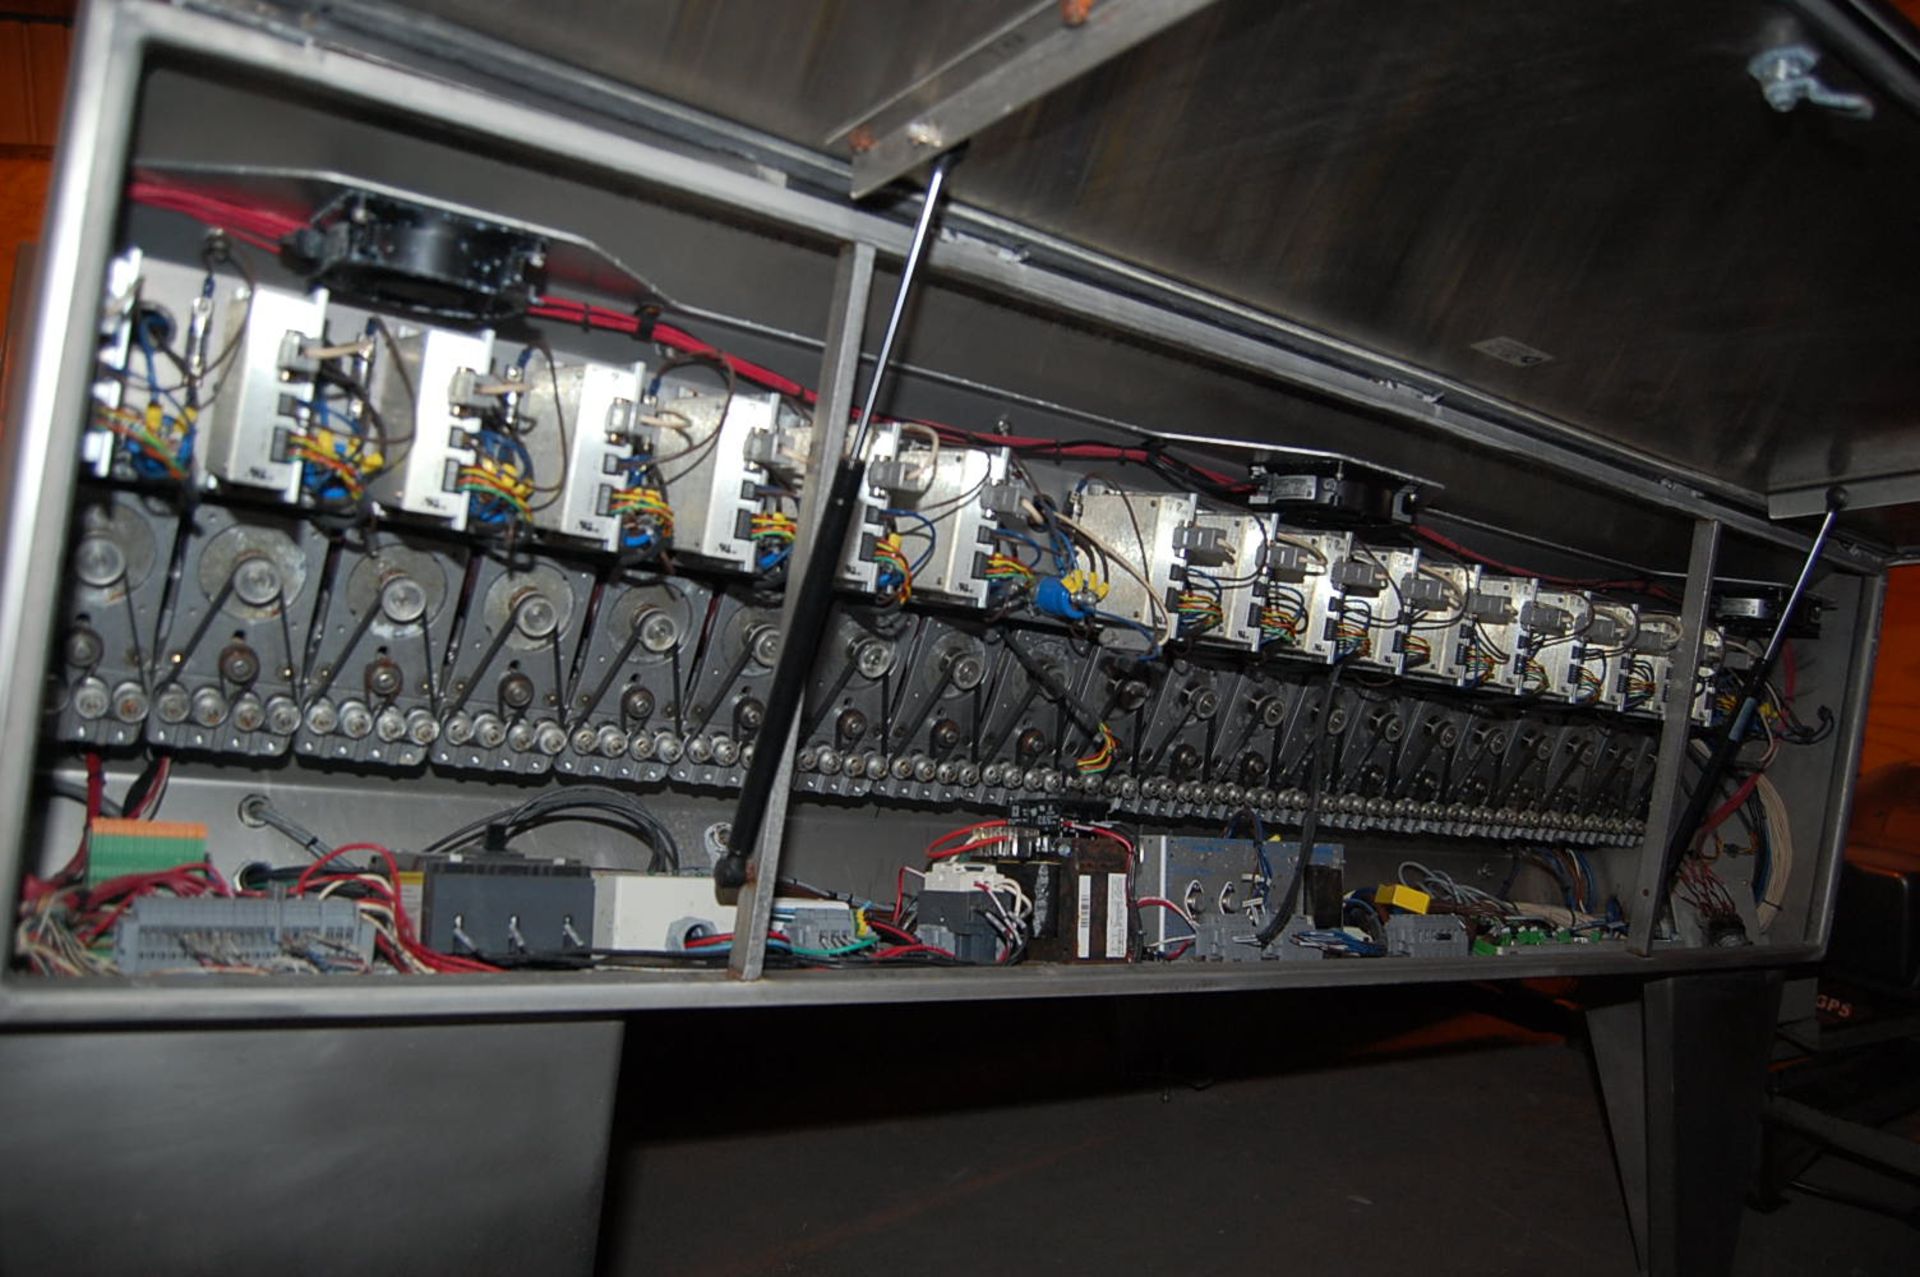 (3) Anble/Conveyor, Stainless Steel Design, Each 84 in. Length, Pacific Scientific Relays & Controls - Image 3 of 3